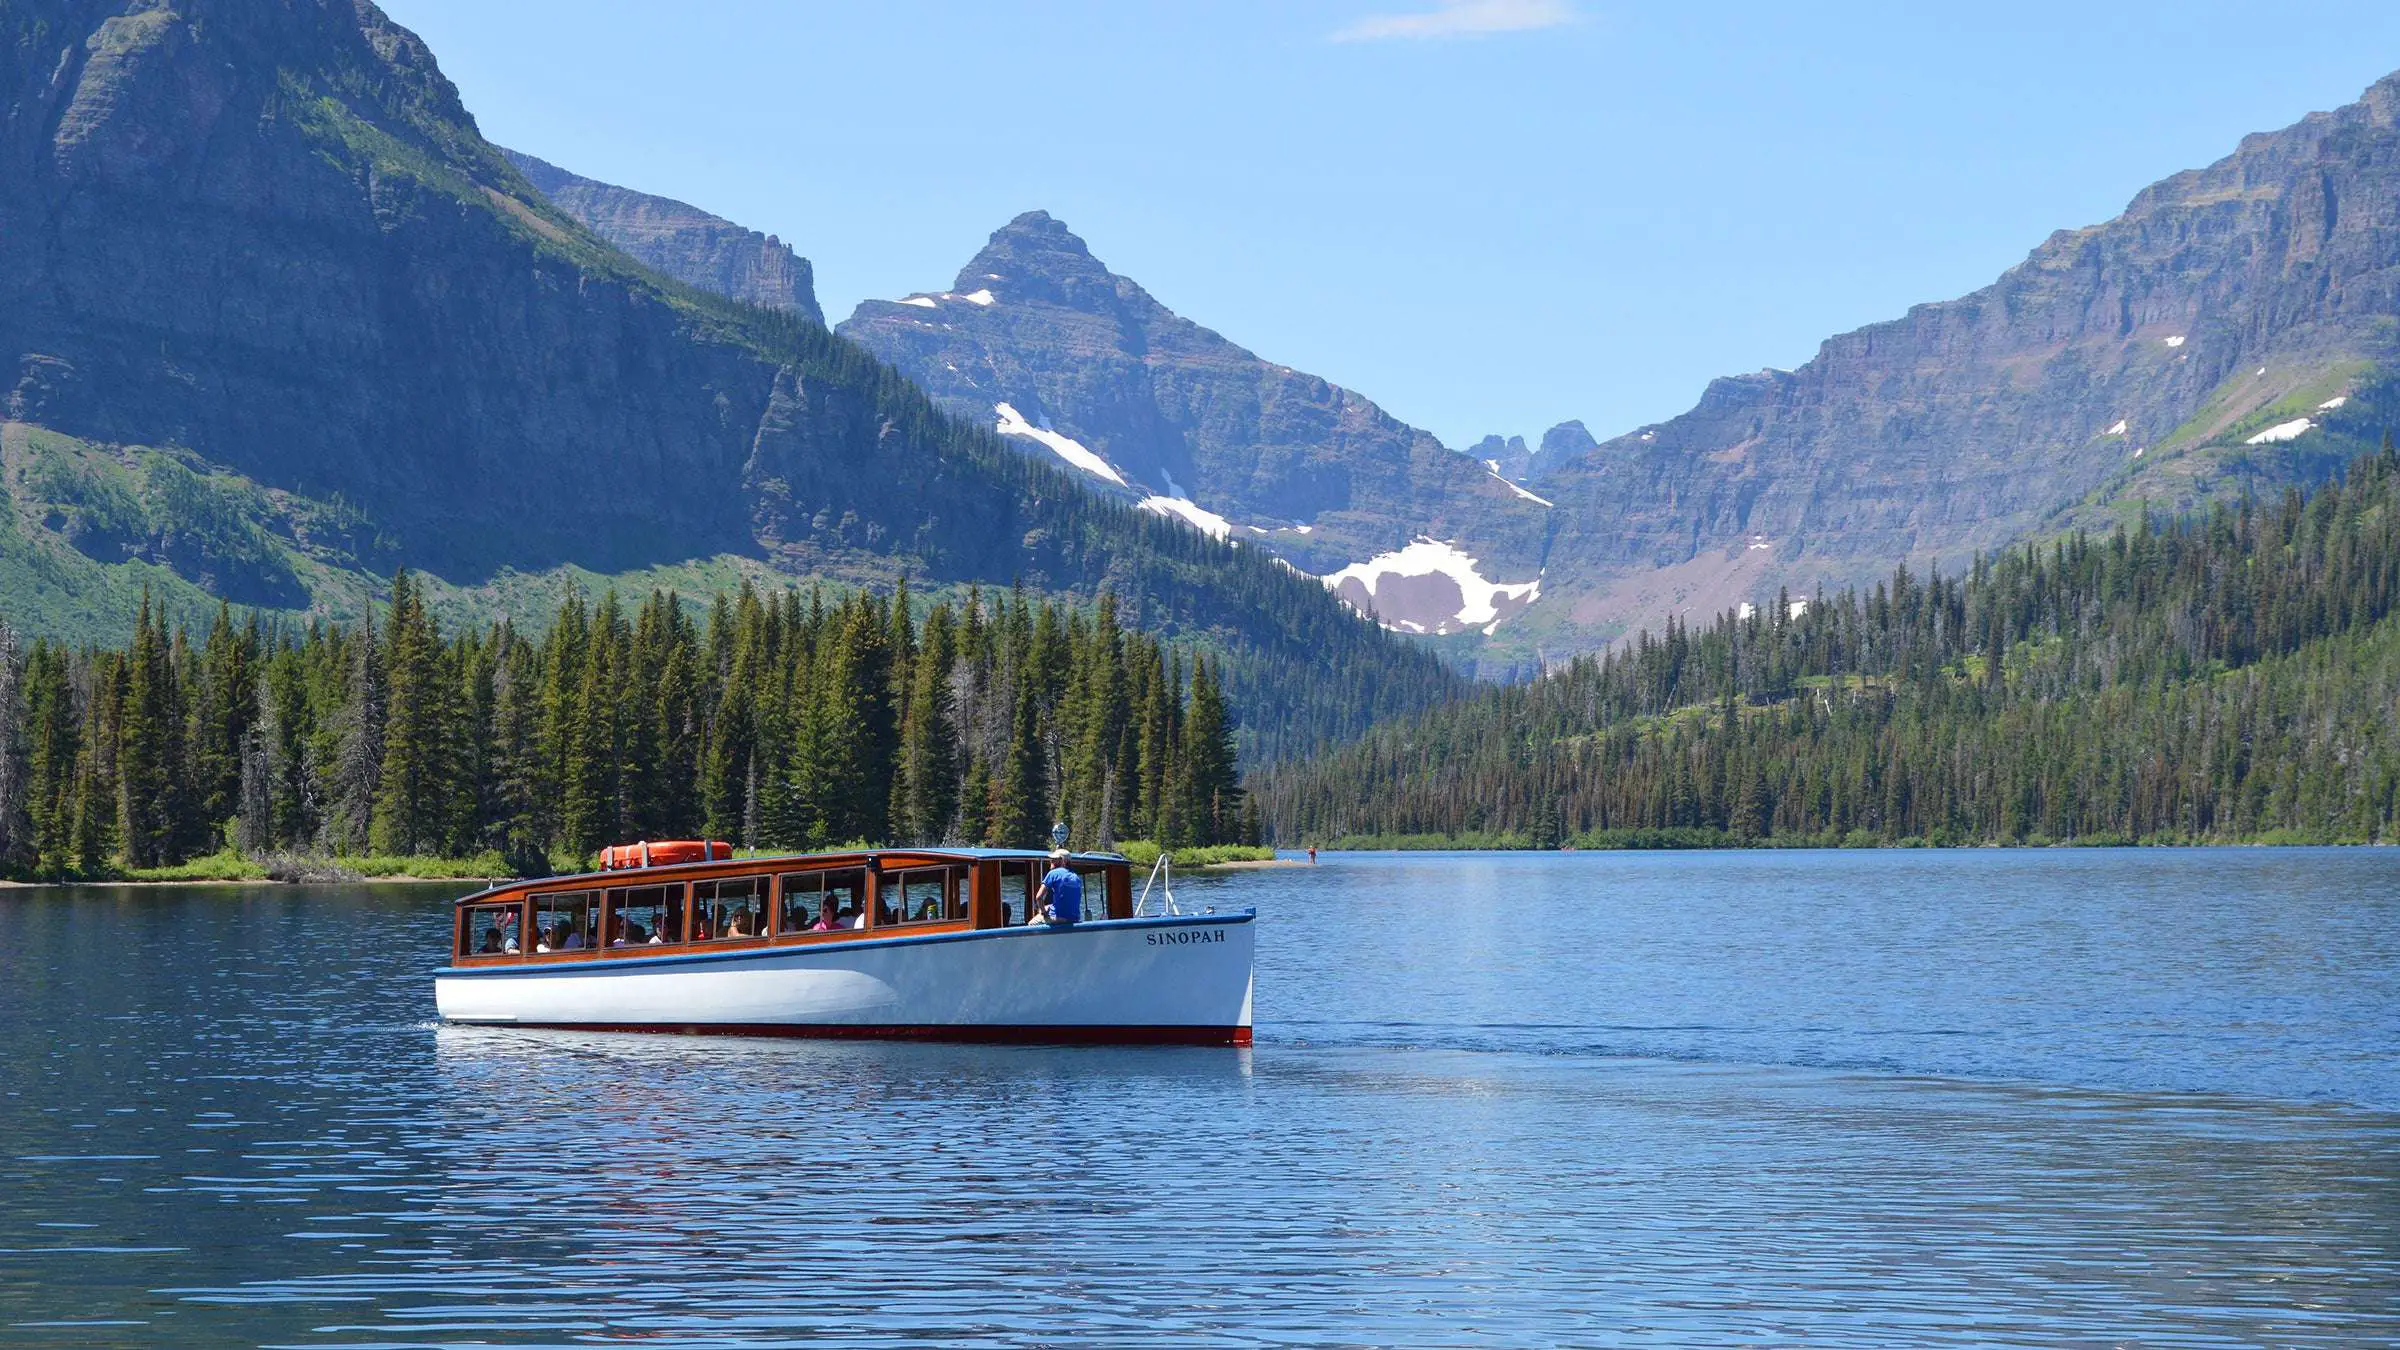 Boat tour on the Sinopah on Two Medicine Lake in Glacier National Park ...